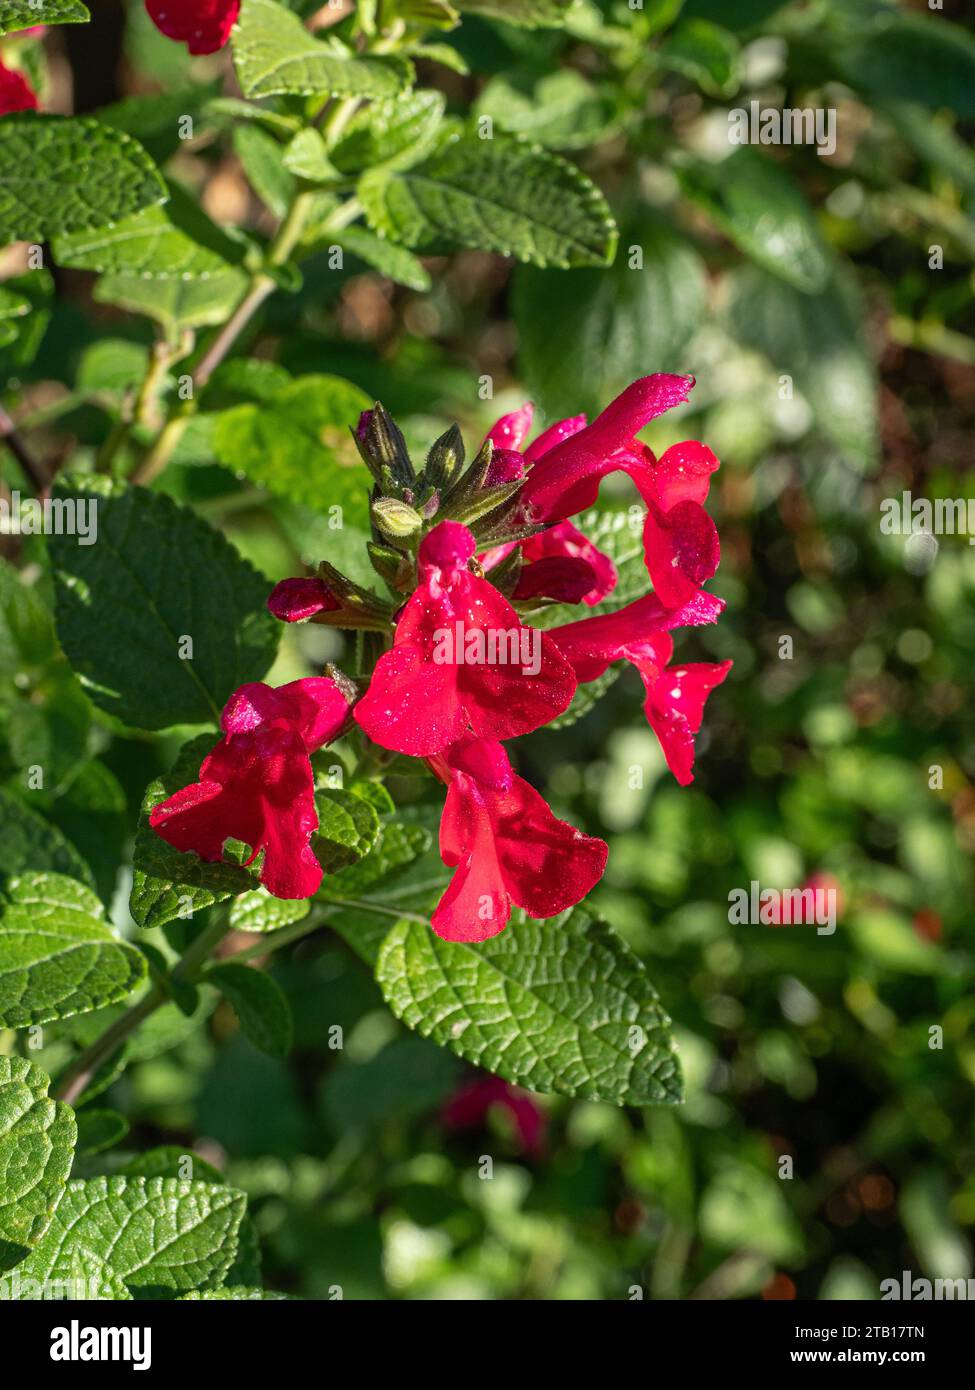 A single bright red flower cluster of Salvia microphylla 'Huntington Red' against the bright green foliage Stock Photo